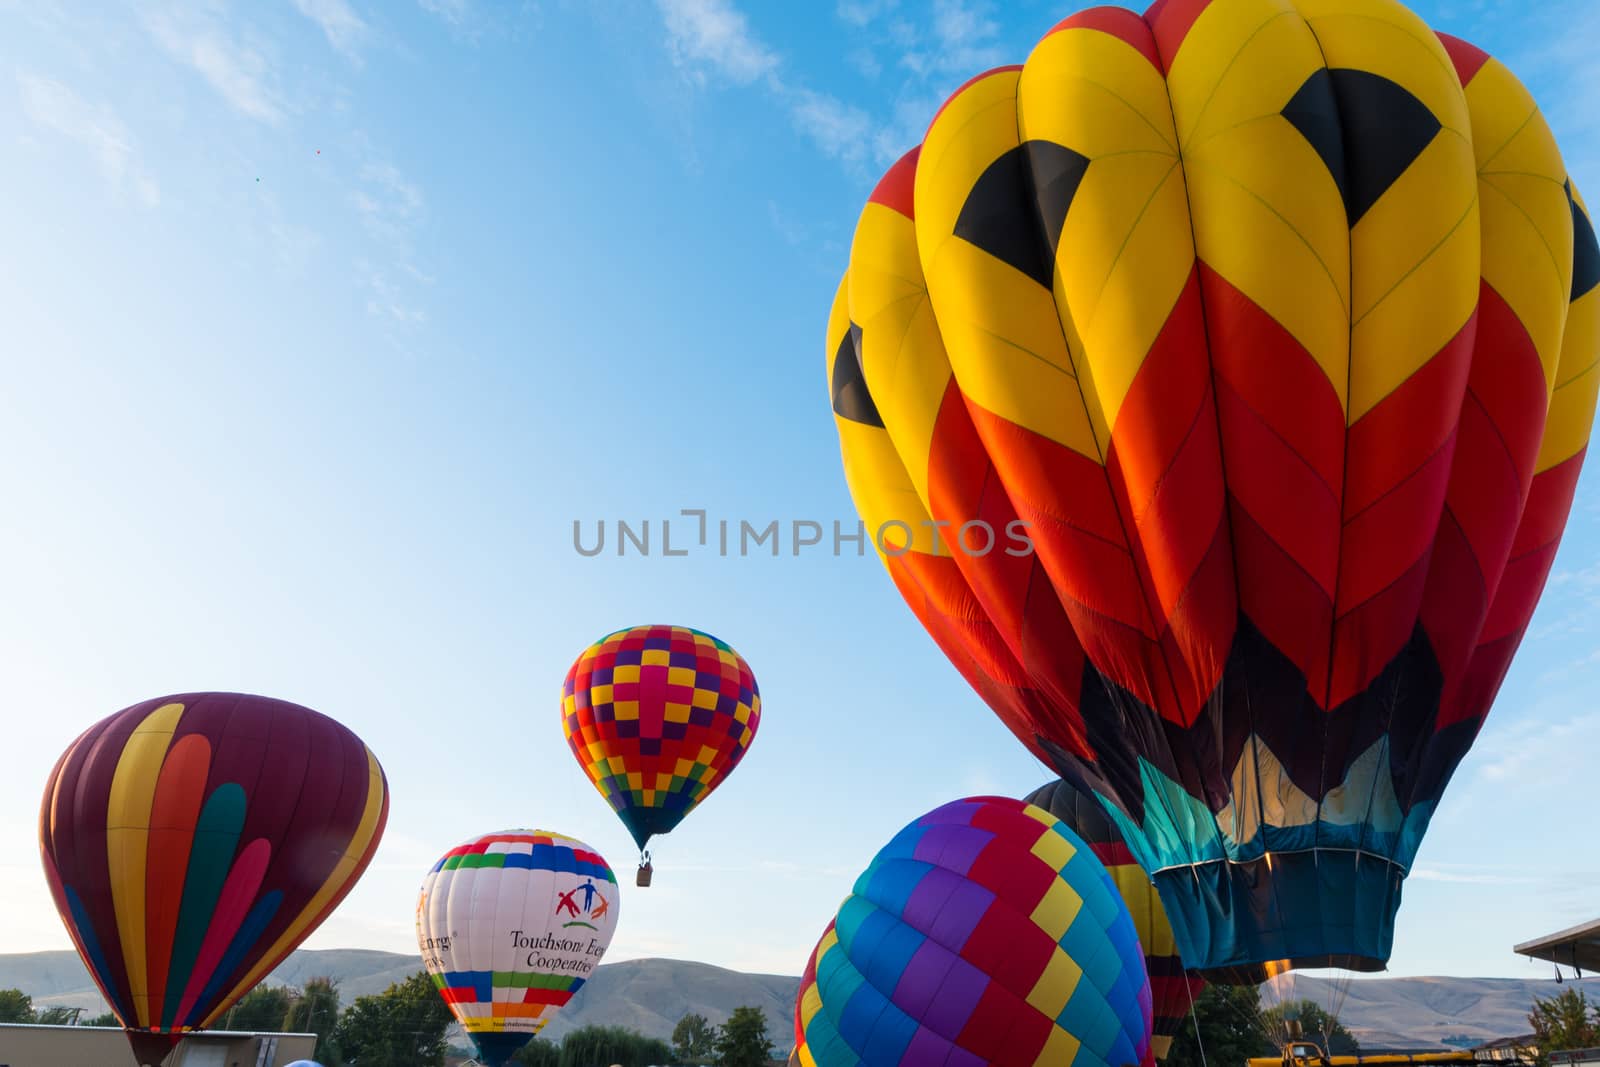 Every Fall, dozens of hot air balloons gather in Prosser, WA, for three days of ballooning and harvest festival